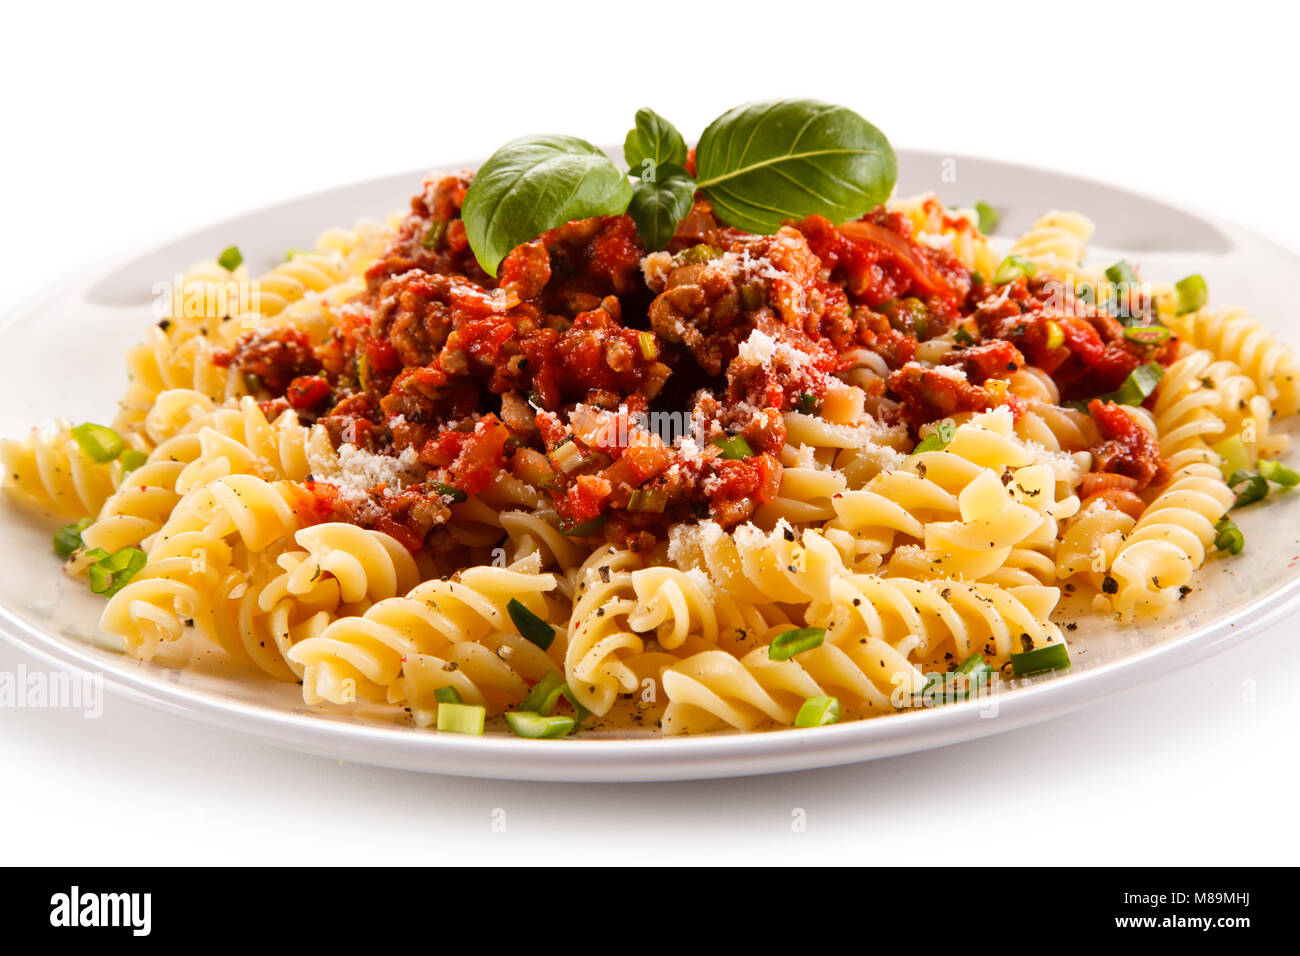 Pasta with meat, tomato sauce and vegetables on white background Stock Photo